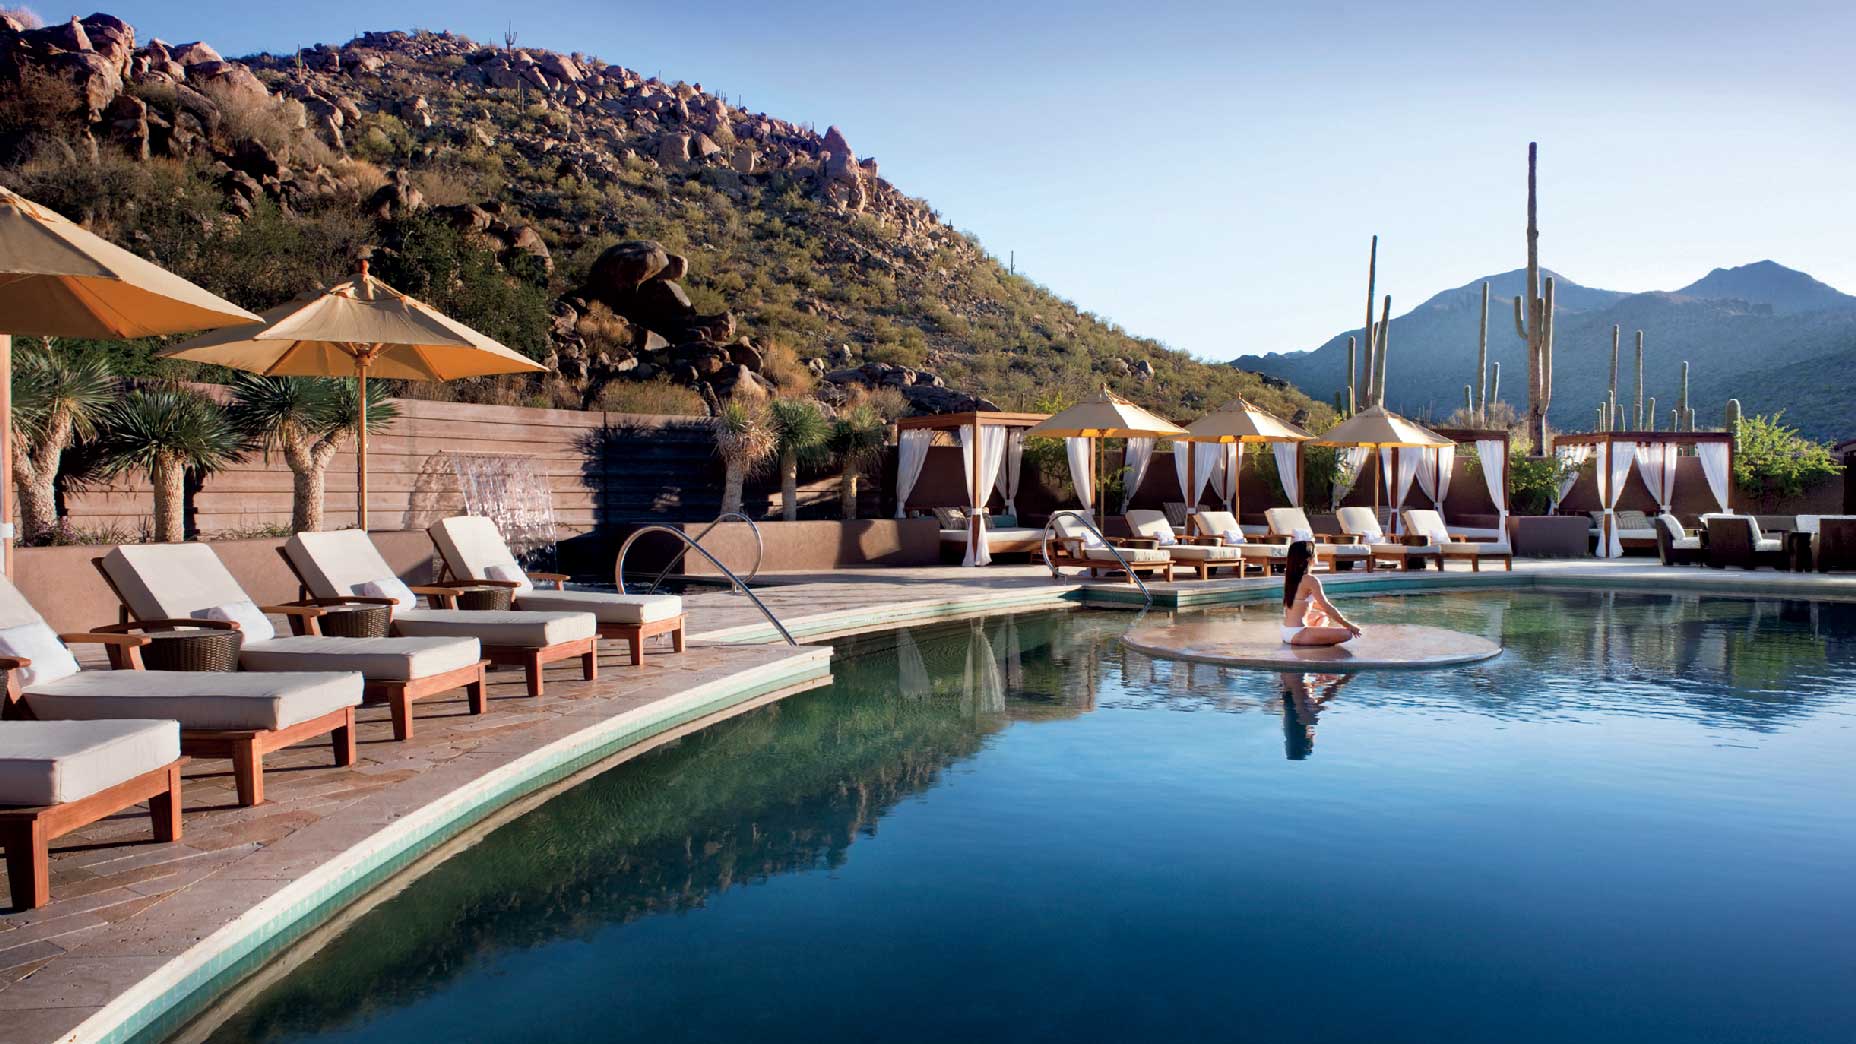 The Ritz Carlton Dove Mountain pool features stunning views as well